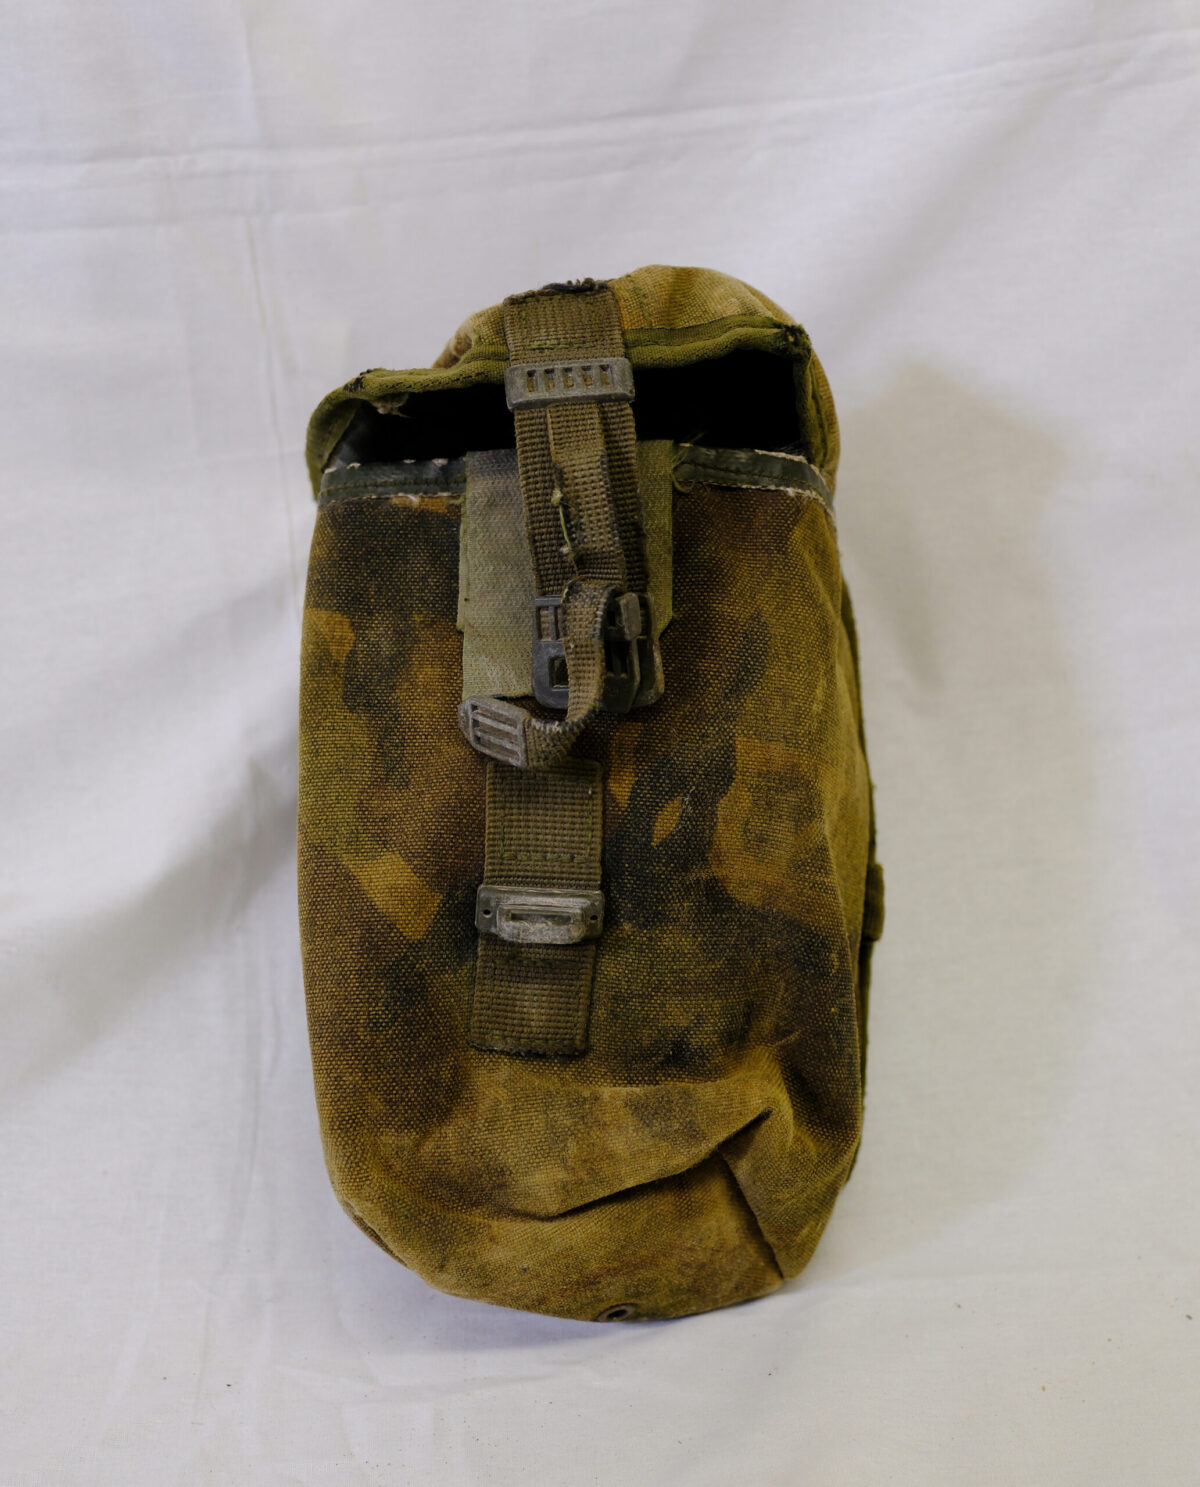 British Army issued webbing water bottle pouch used on Operations by a soldier from the Royal Anglian Regiment